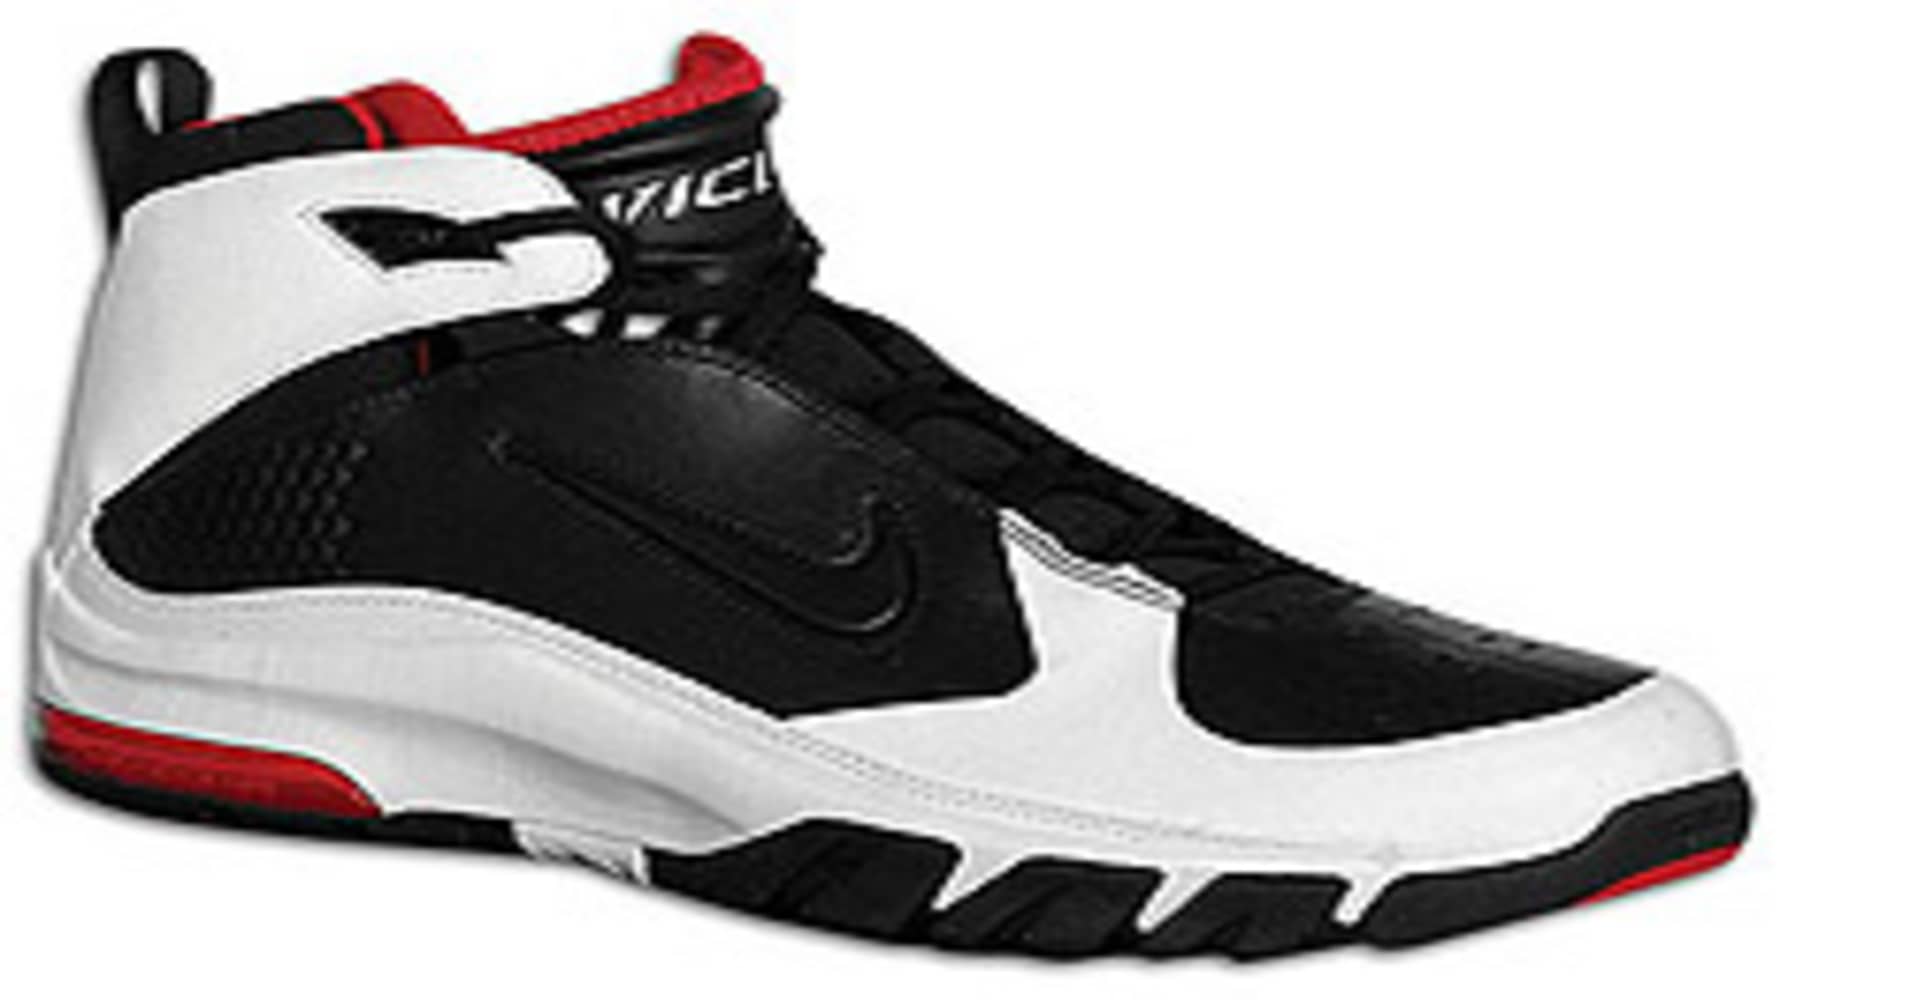 Michael Vick Indictment No Problem For Shoe Release (update)